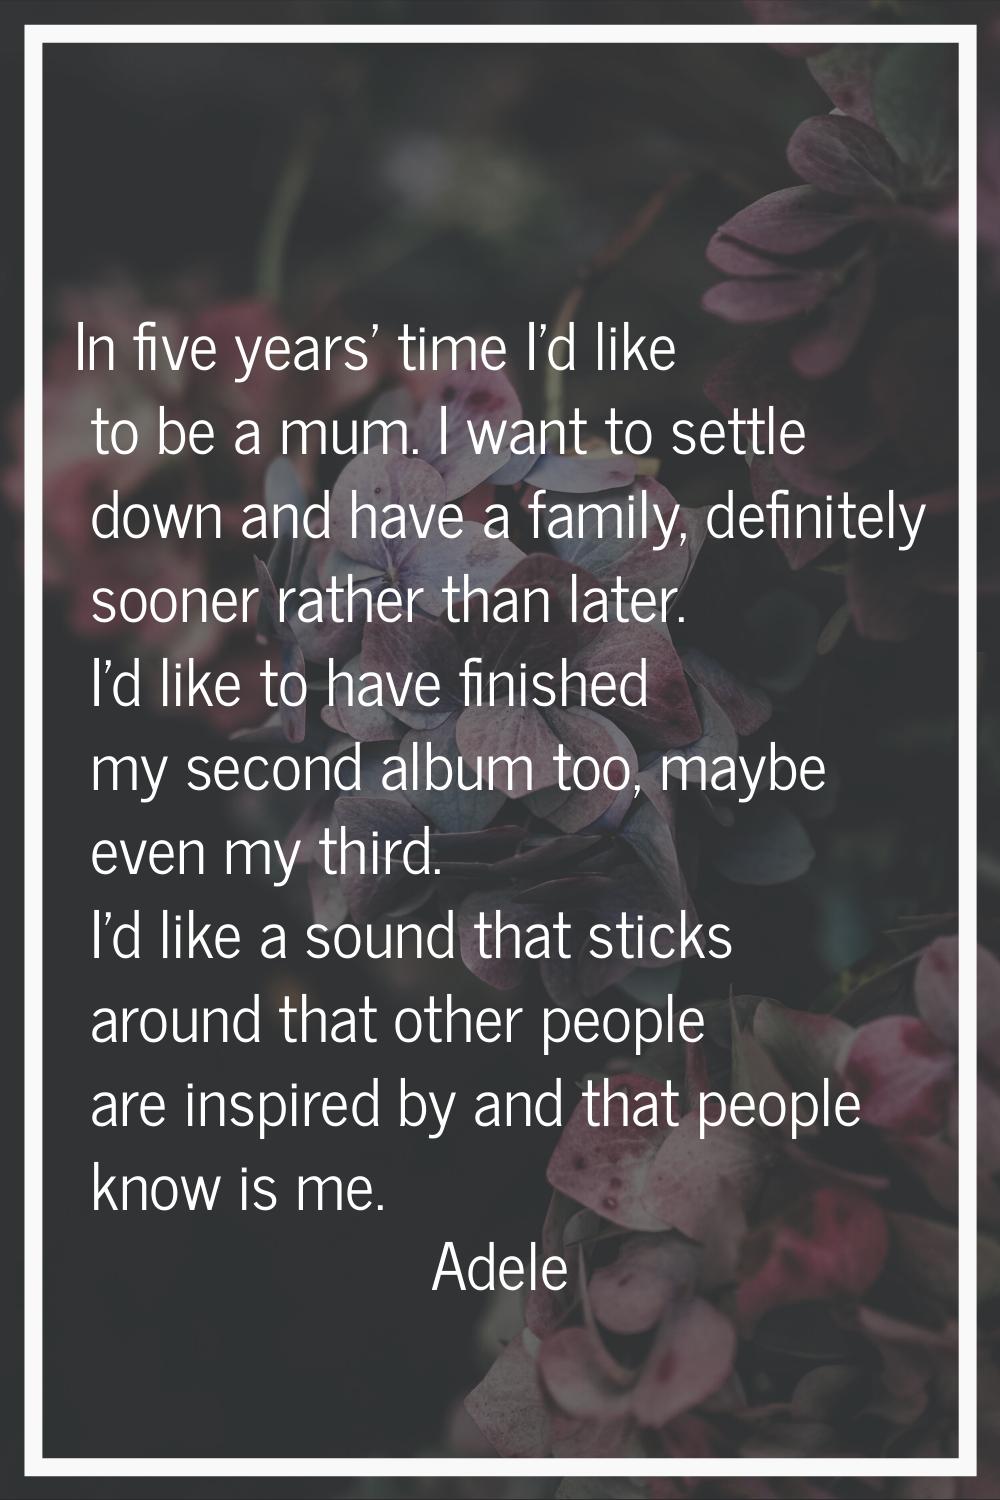 In five years' time I'd like to be a mum. I want to settle down and have a family, definitely soone